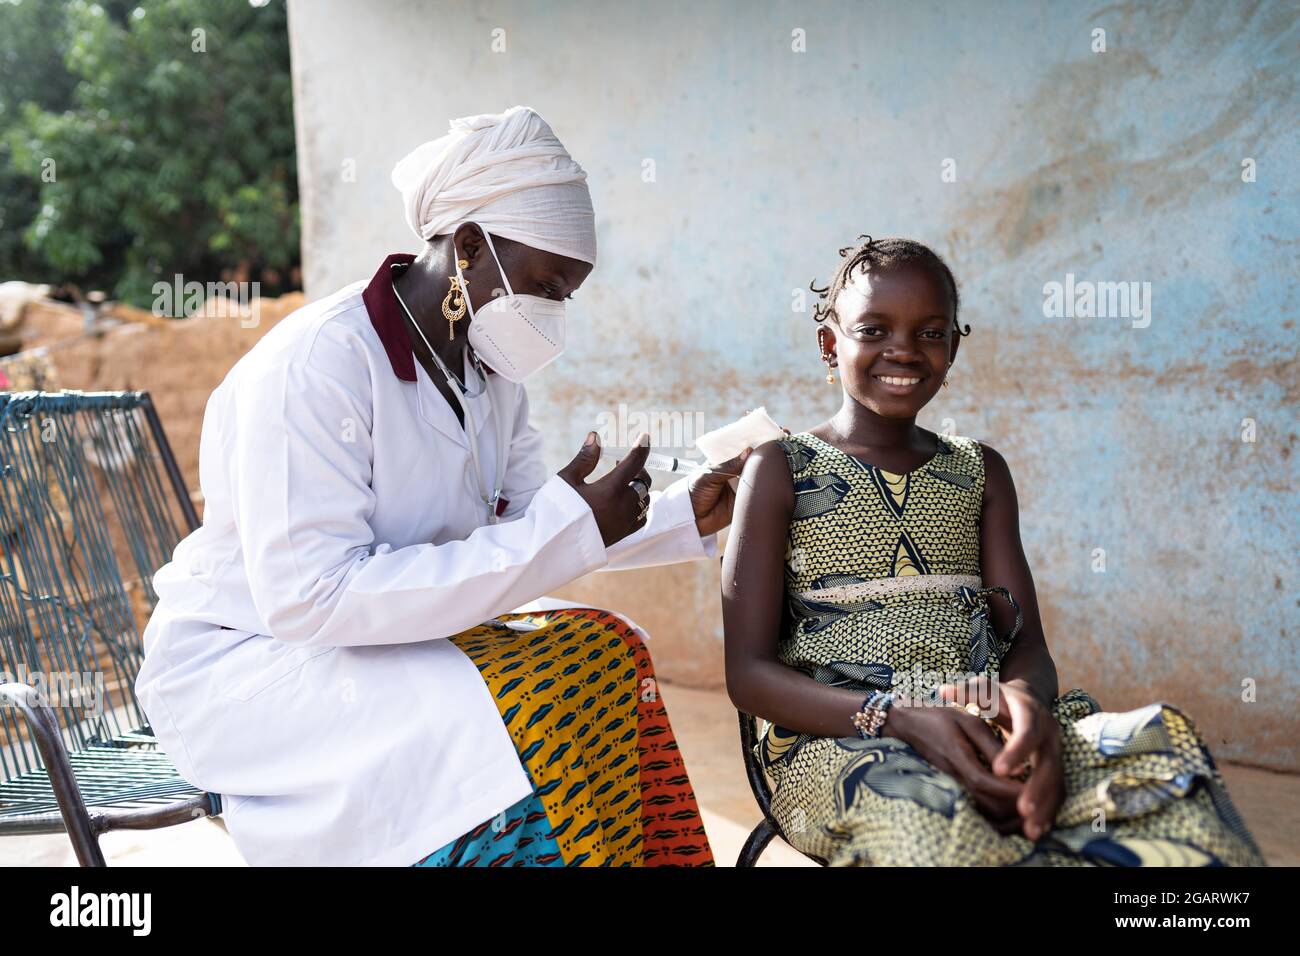 In this image, a courageous little African girl is smiling into the camera while receiving a vaccine shot by a gentle young black nurse sitting next t Stock Photo